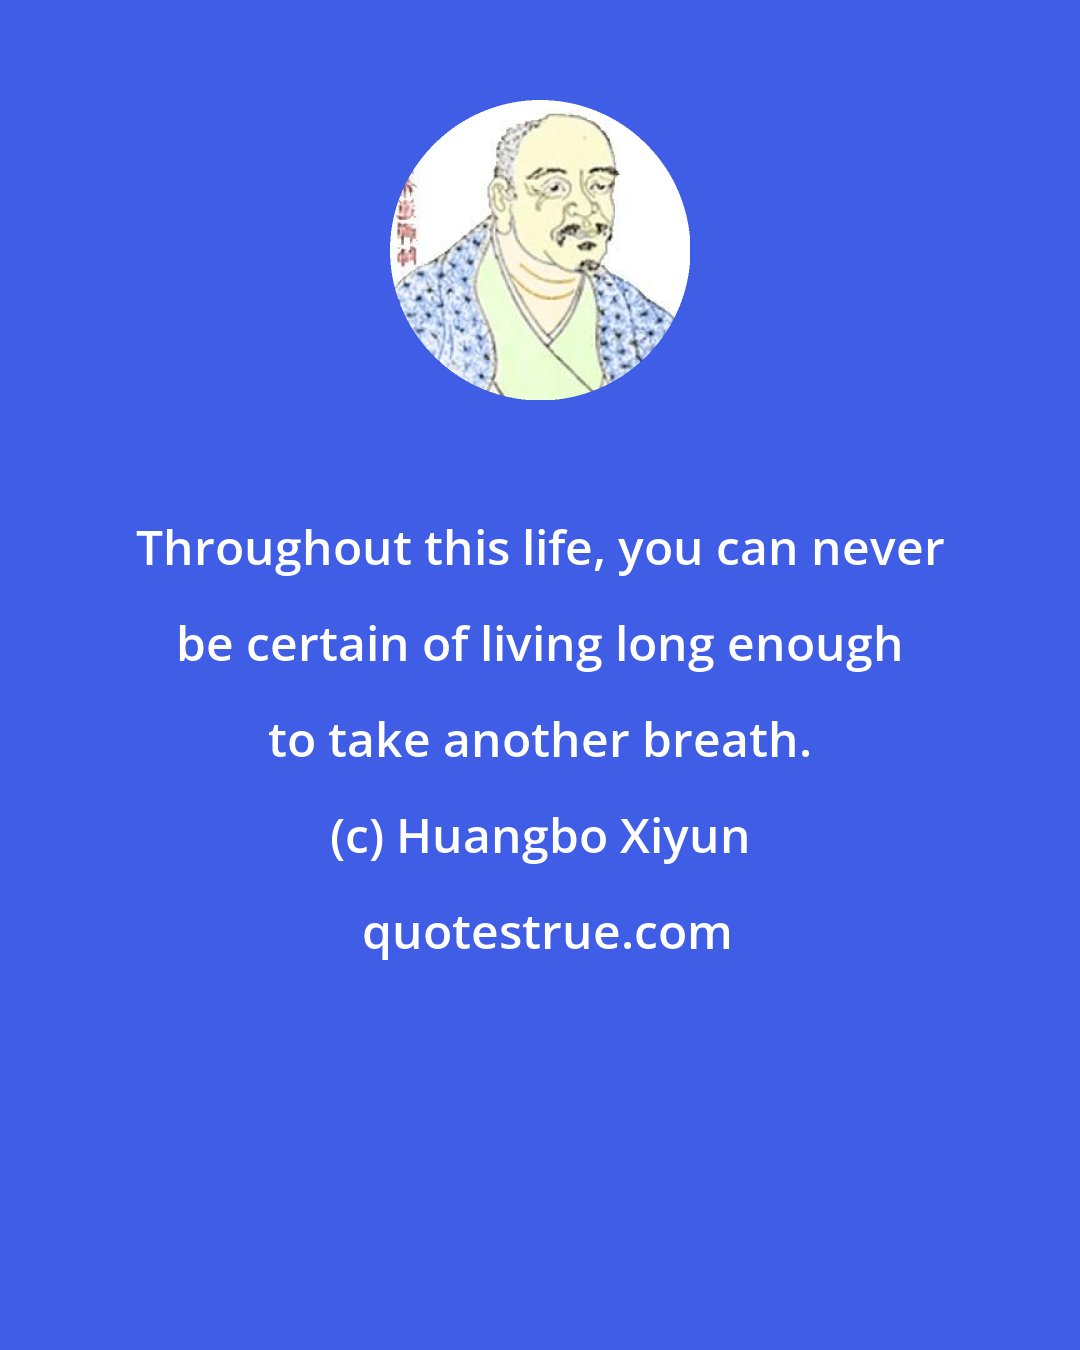 Huangbo Xiyun: Throughout this life, you can never be certain of living long enough to take another breath.